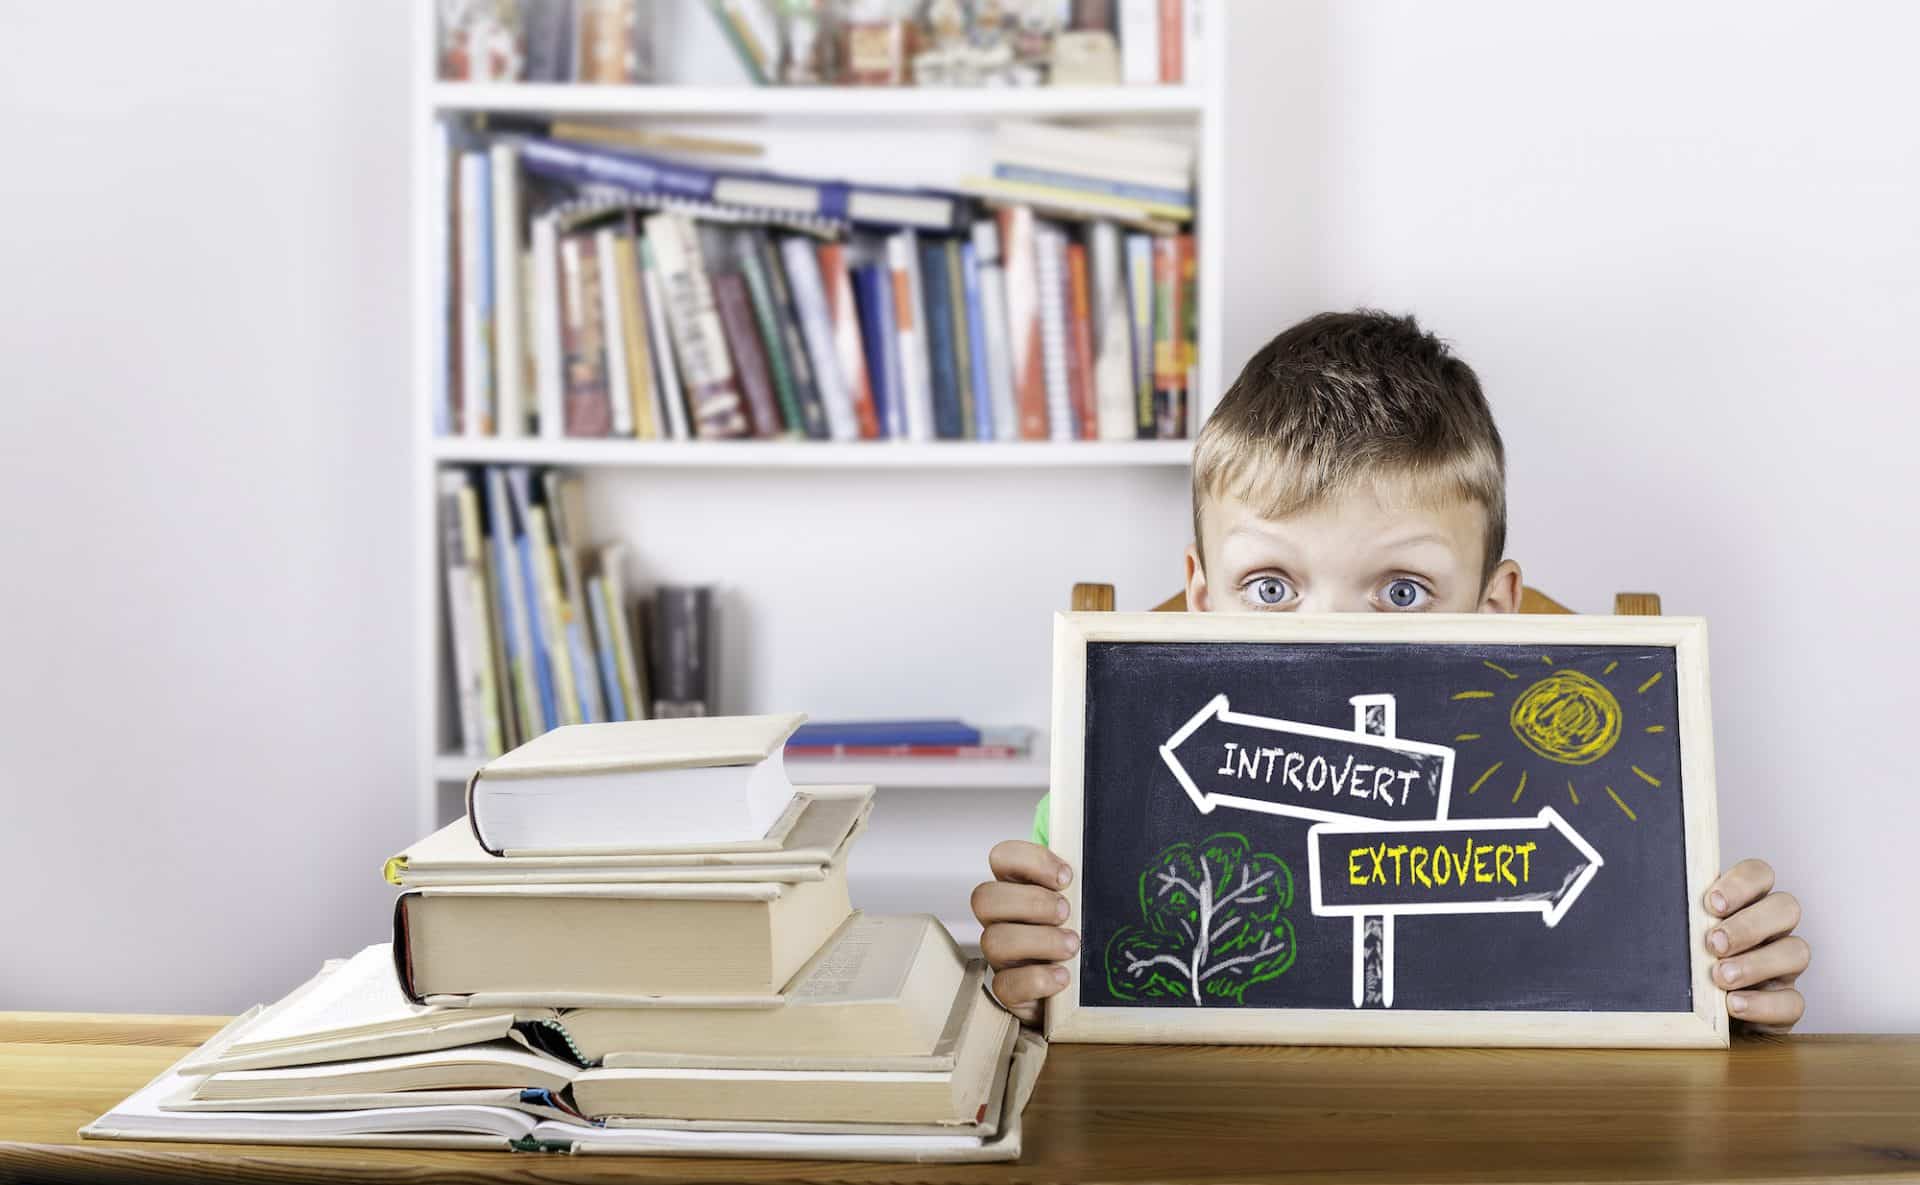 An introverted boy holding up a chalkboard with a directional sign.